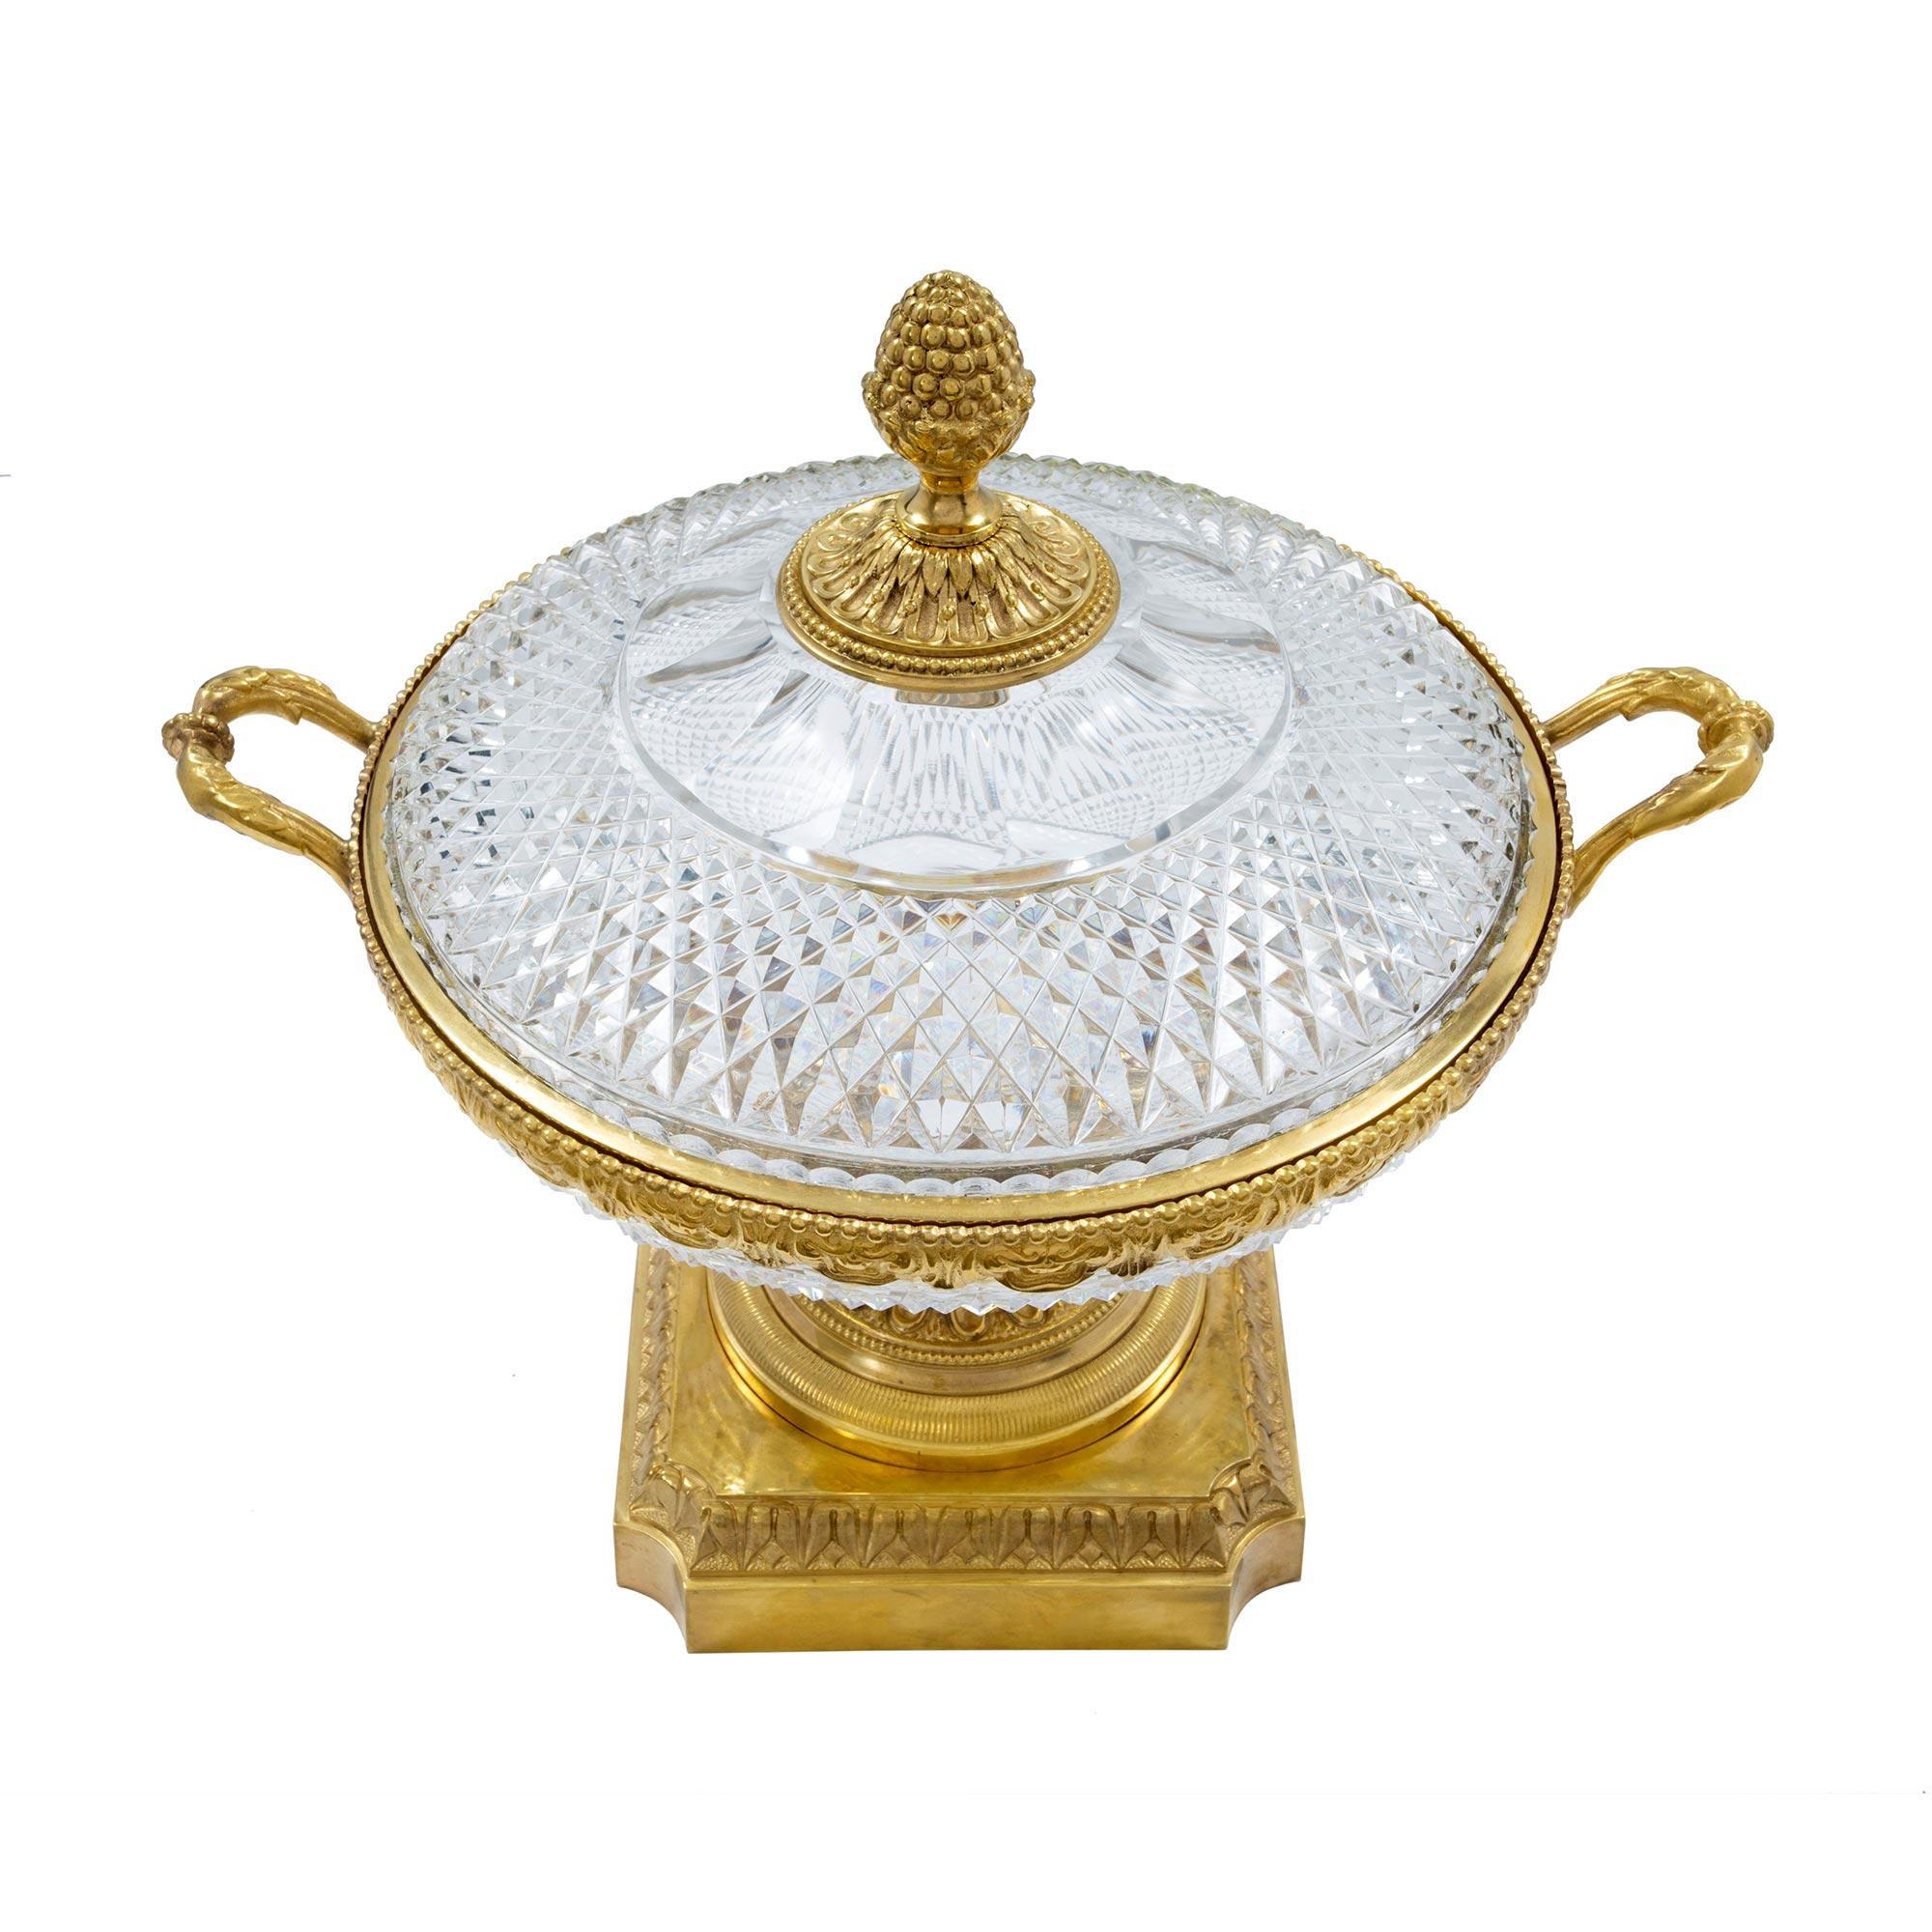 A spectacular French mid-19th century Louis XVI st. Baccarat crystal and ormolu centerpiece. The centerpiece is raised by a square and mottled ormolu base with concaved corners and a richly chased moulded border above. The circular moulded support